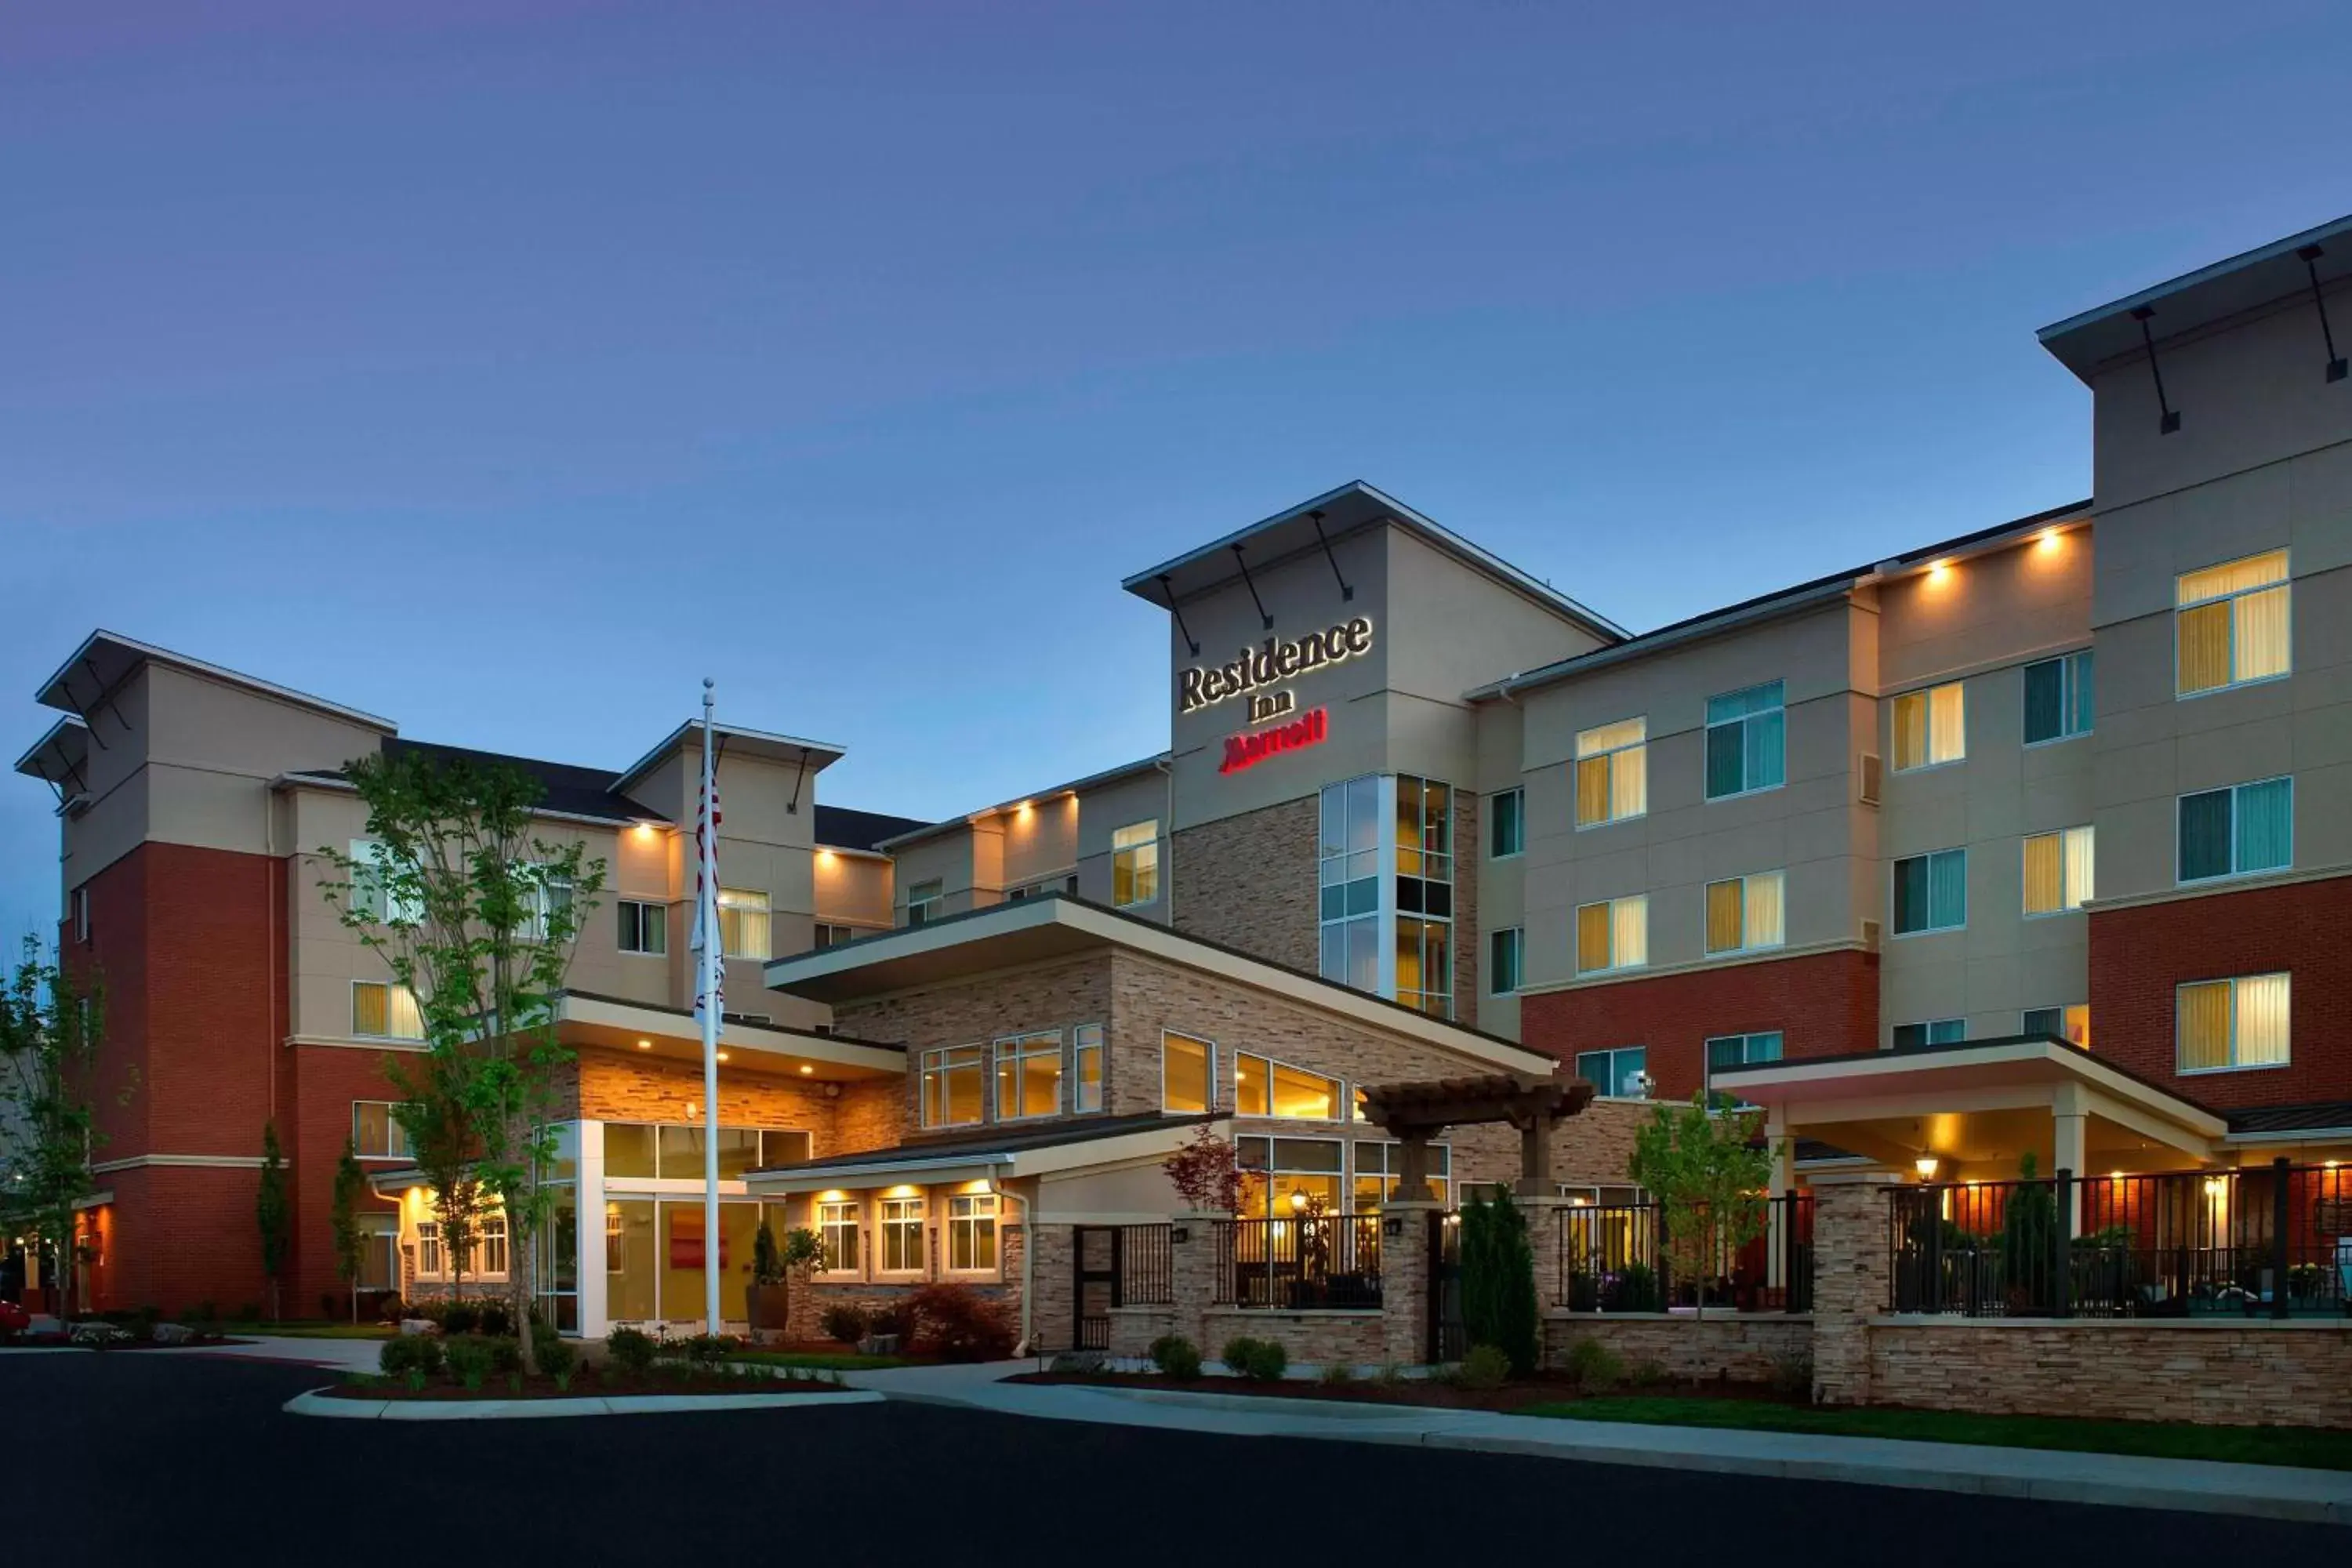 Property Building in Residence Inn by Marriott Nashville South East/Murfreesboro